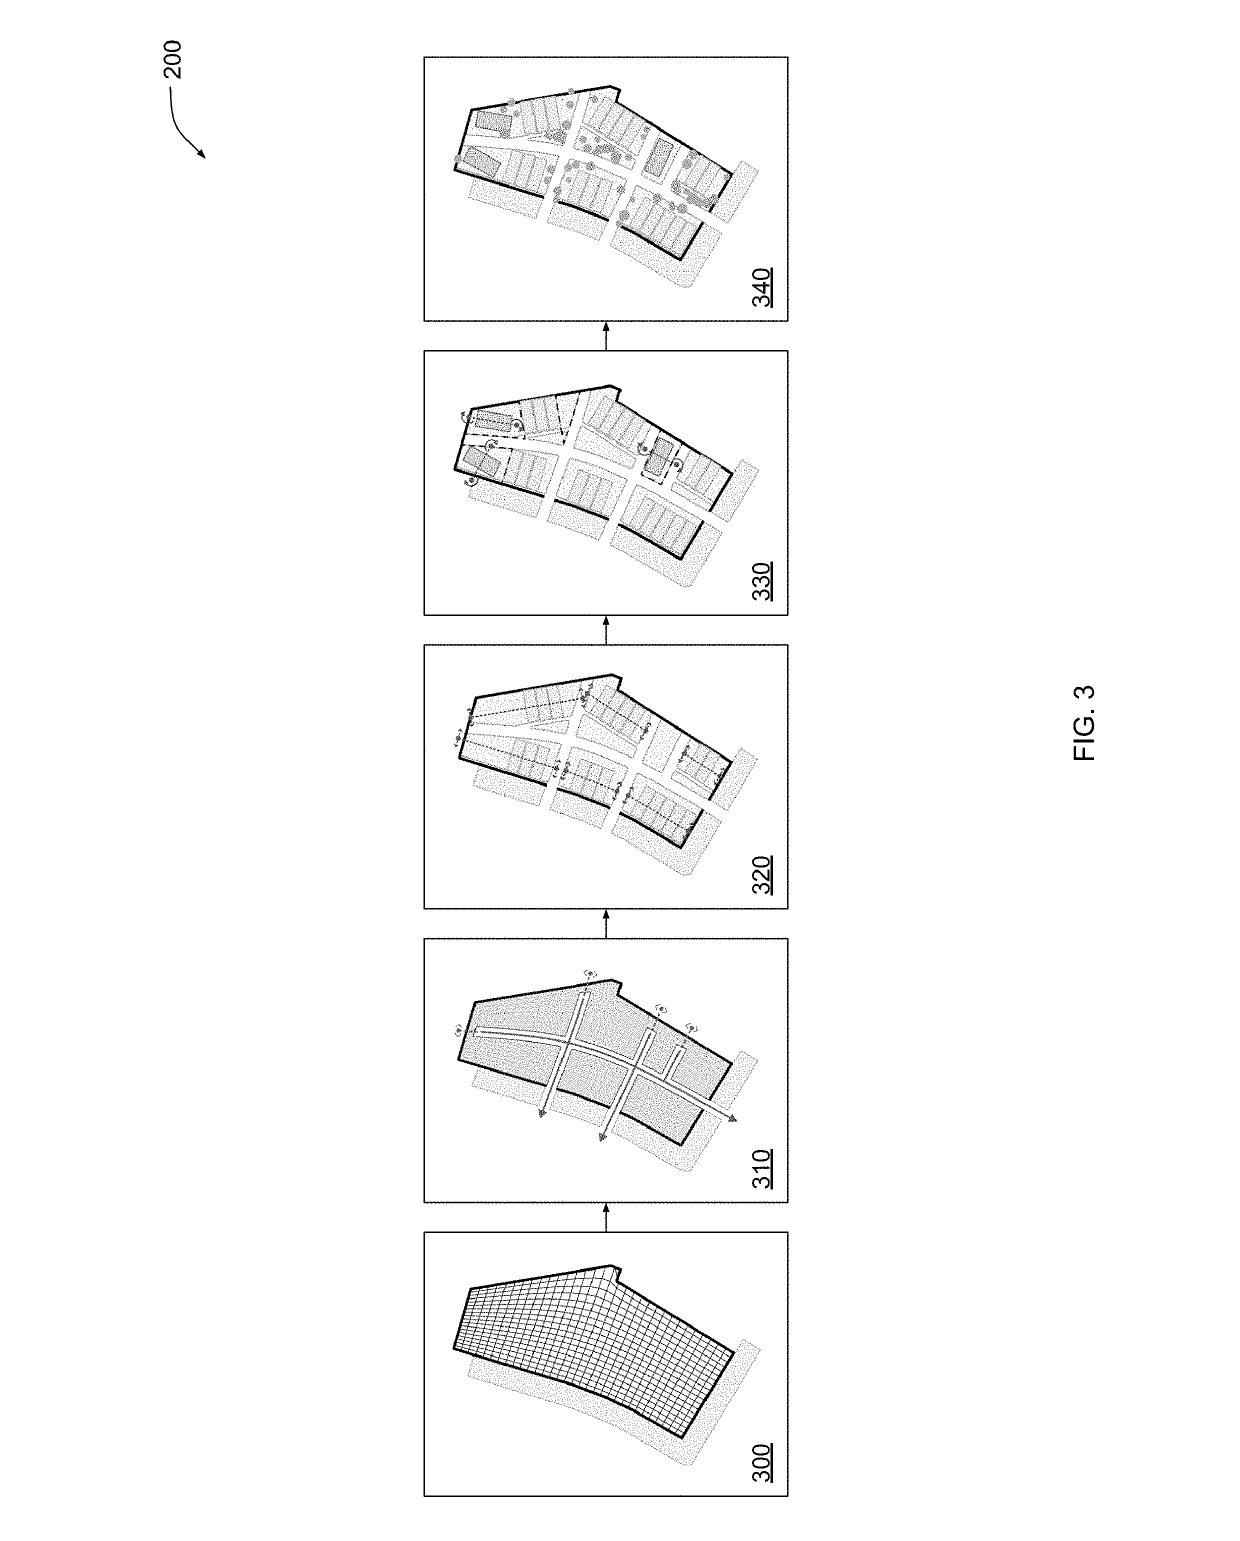 Techniques for automatically generating designs having characteristic topologies for urban design projects